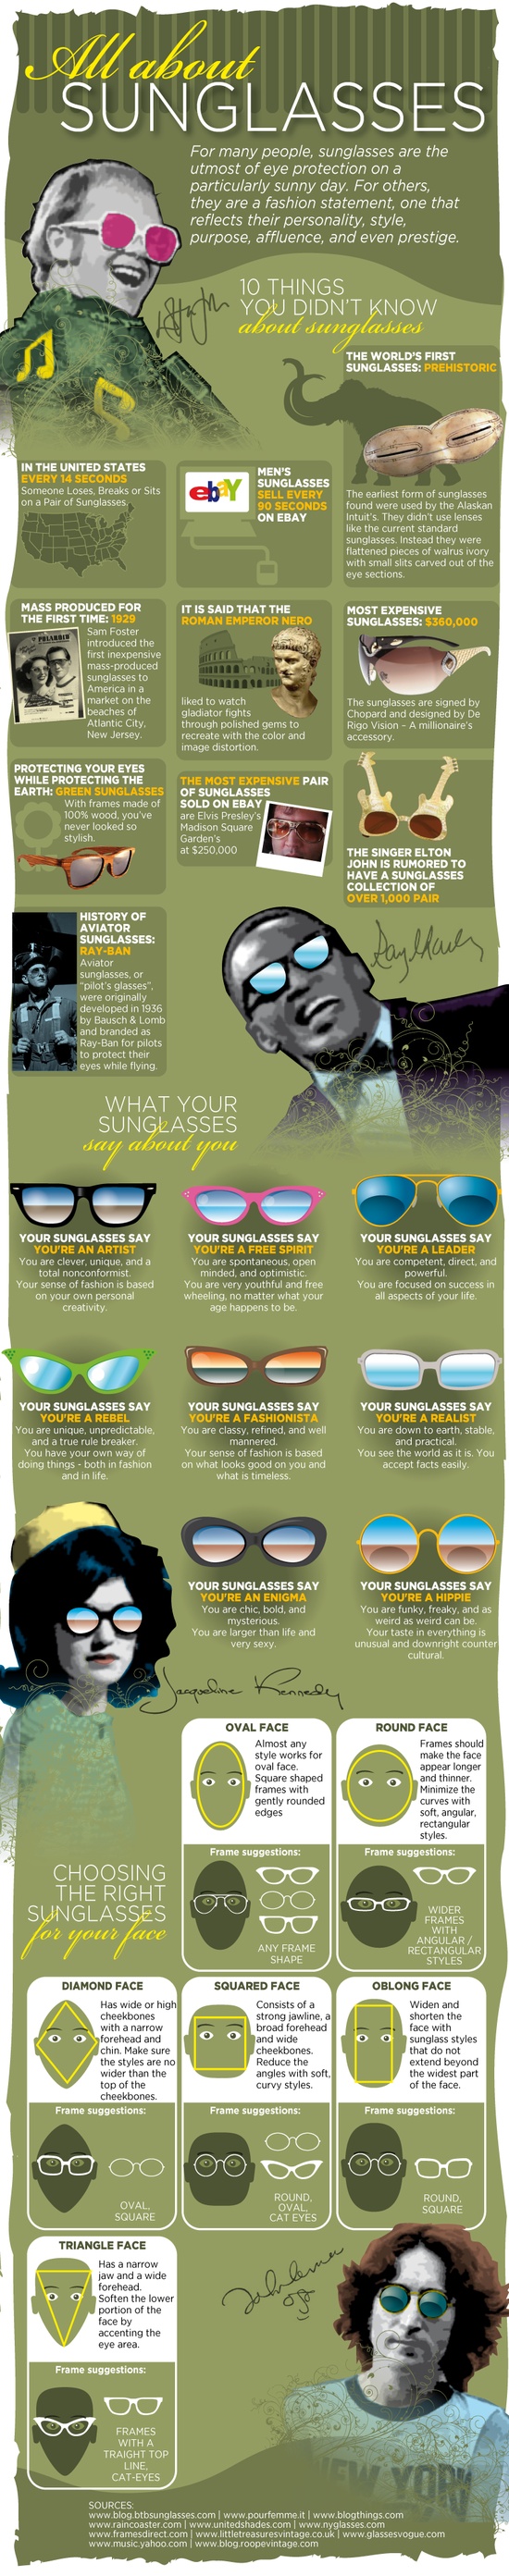 All-about-sunglasses[1]